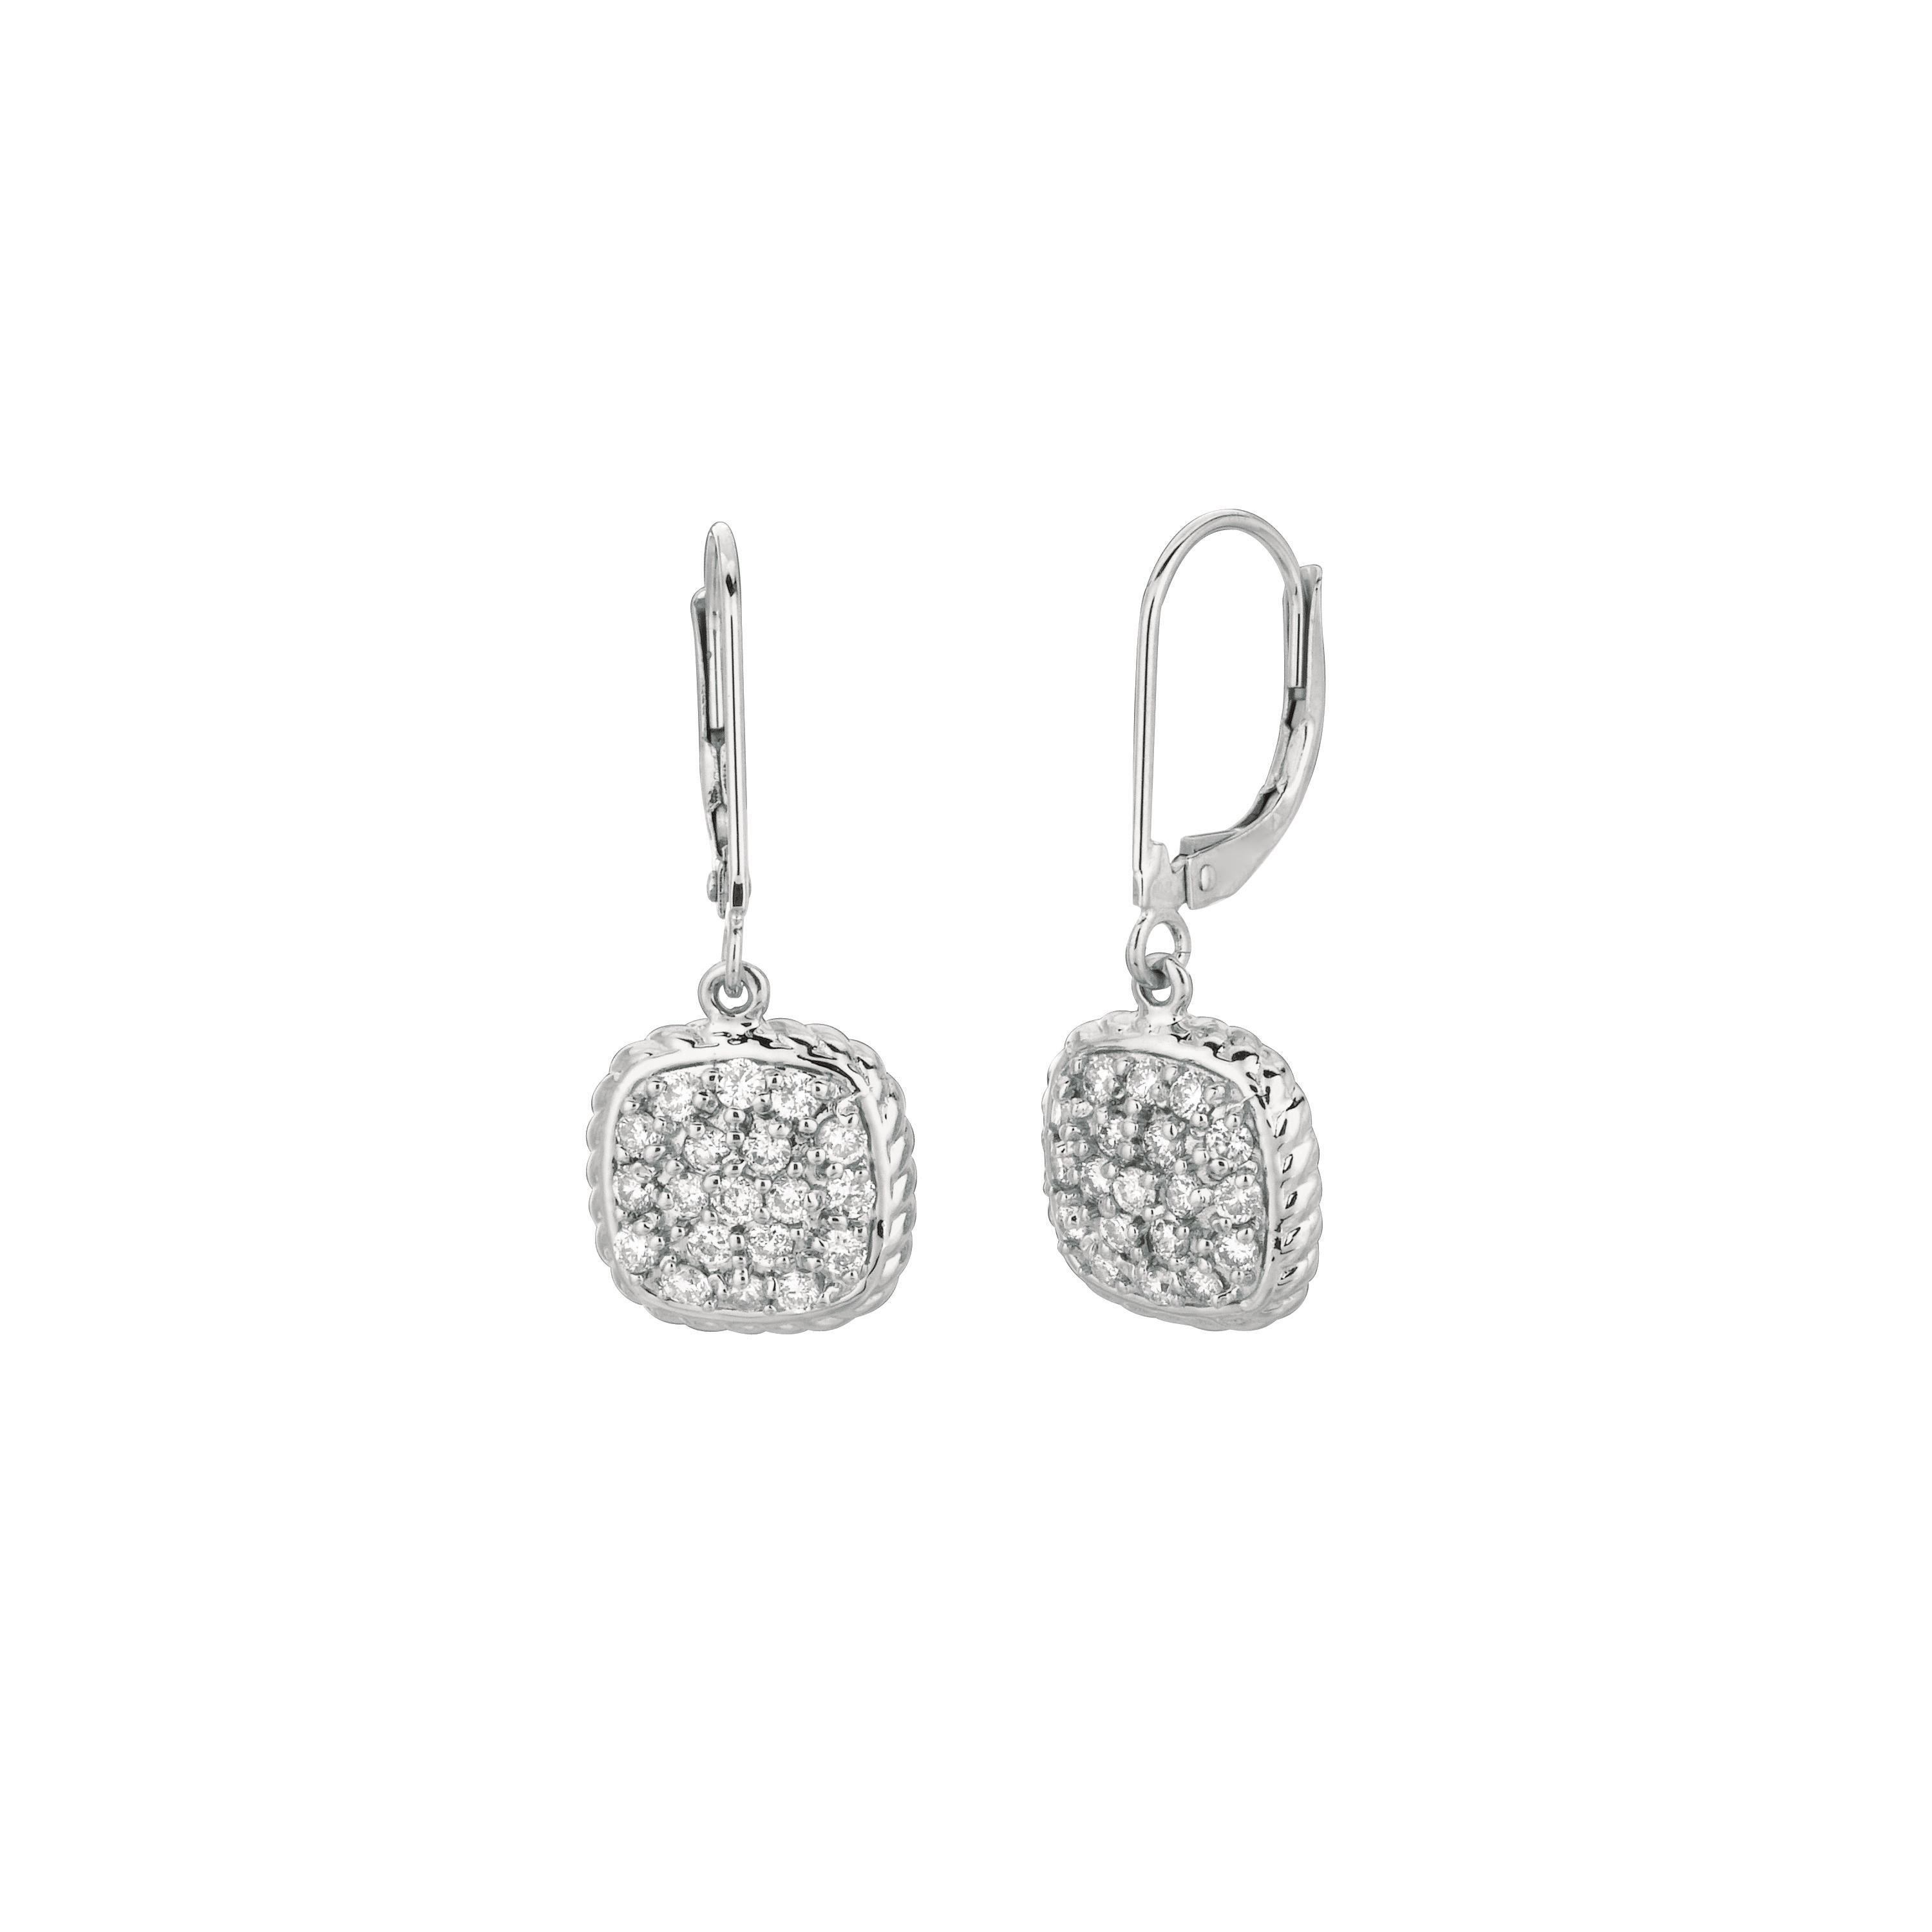 0.80 Carat Natural Diamond Square Drop Earrings G SI 14K White Gold

100% Natural, Not Enhanced in any way Round Cut Diamond Earrings
0.80CT
G-H 
SI  
14K White Gold,  2.9 grams, Pave Style
1 1/16 inch in height, 7/16 inch in width
38 diamonds